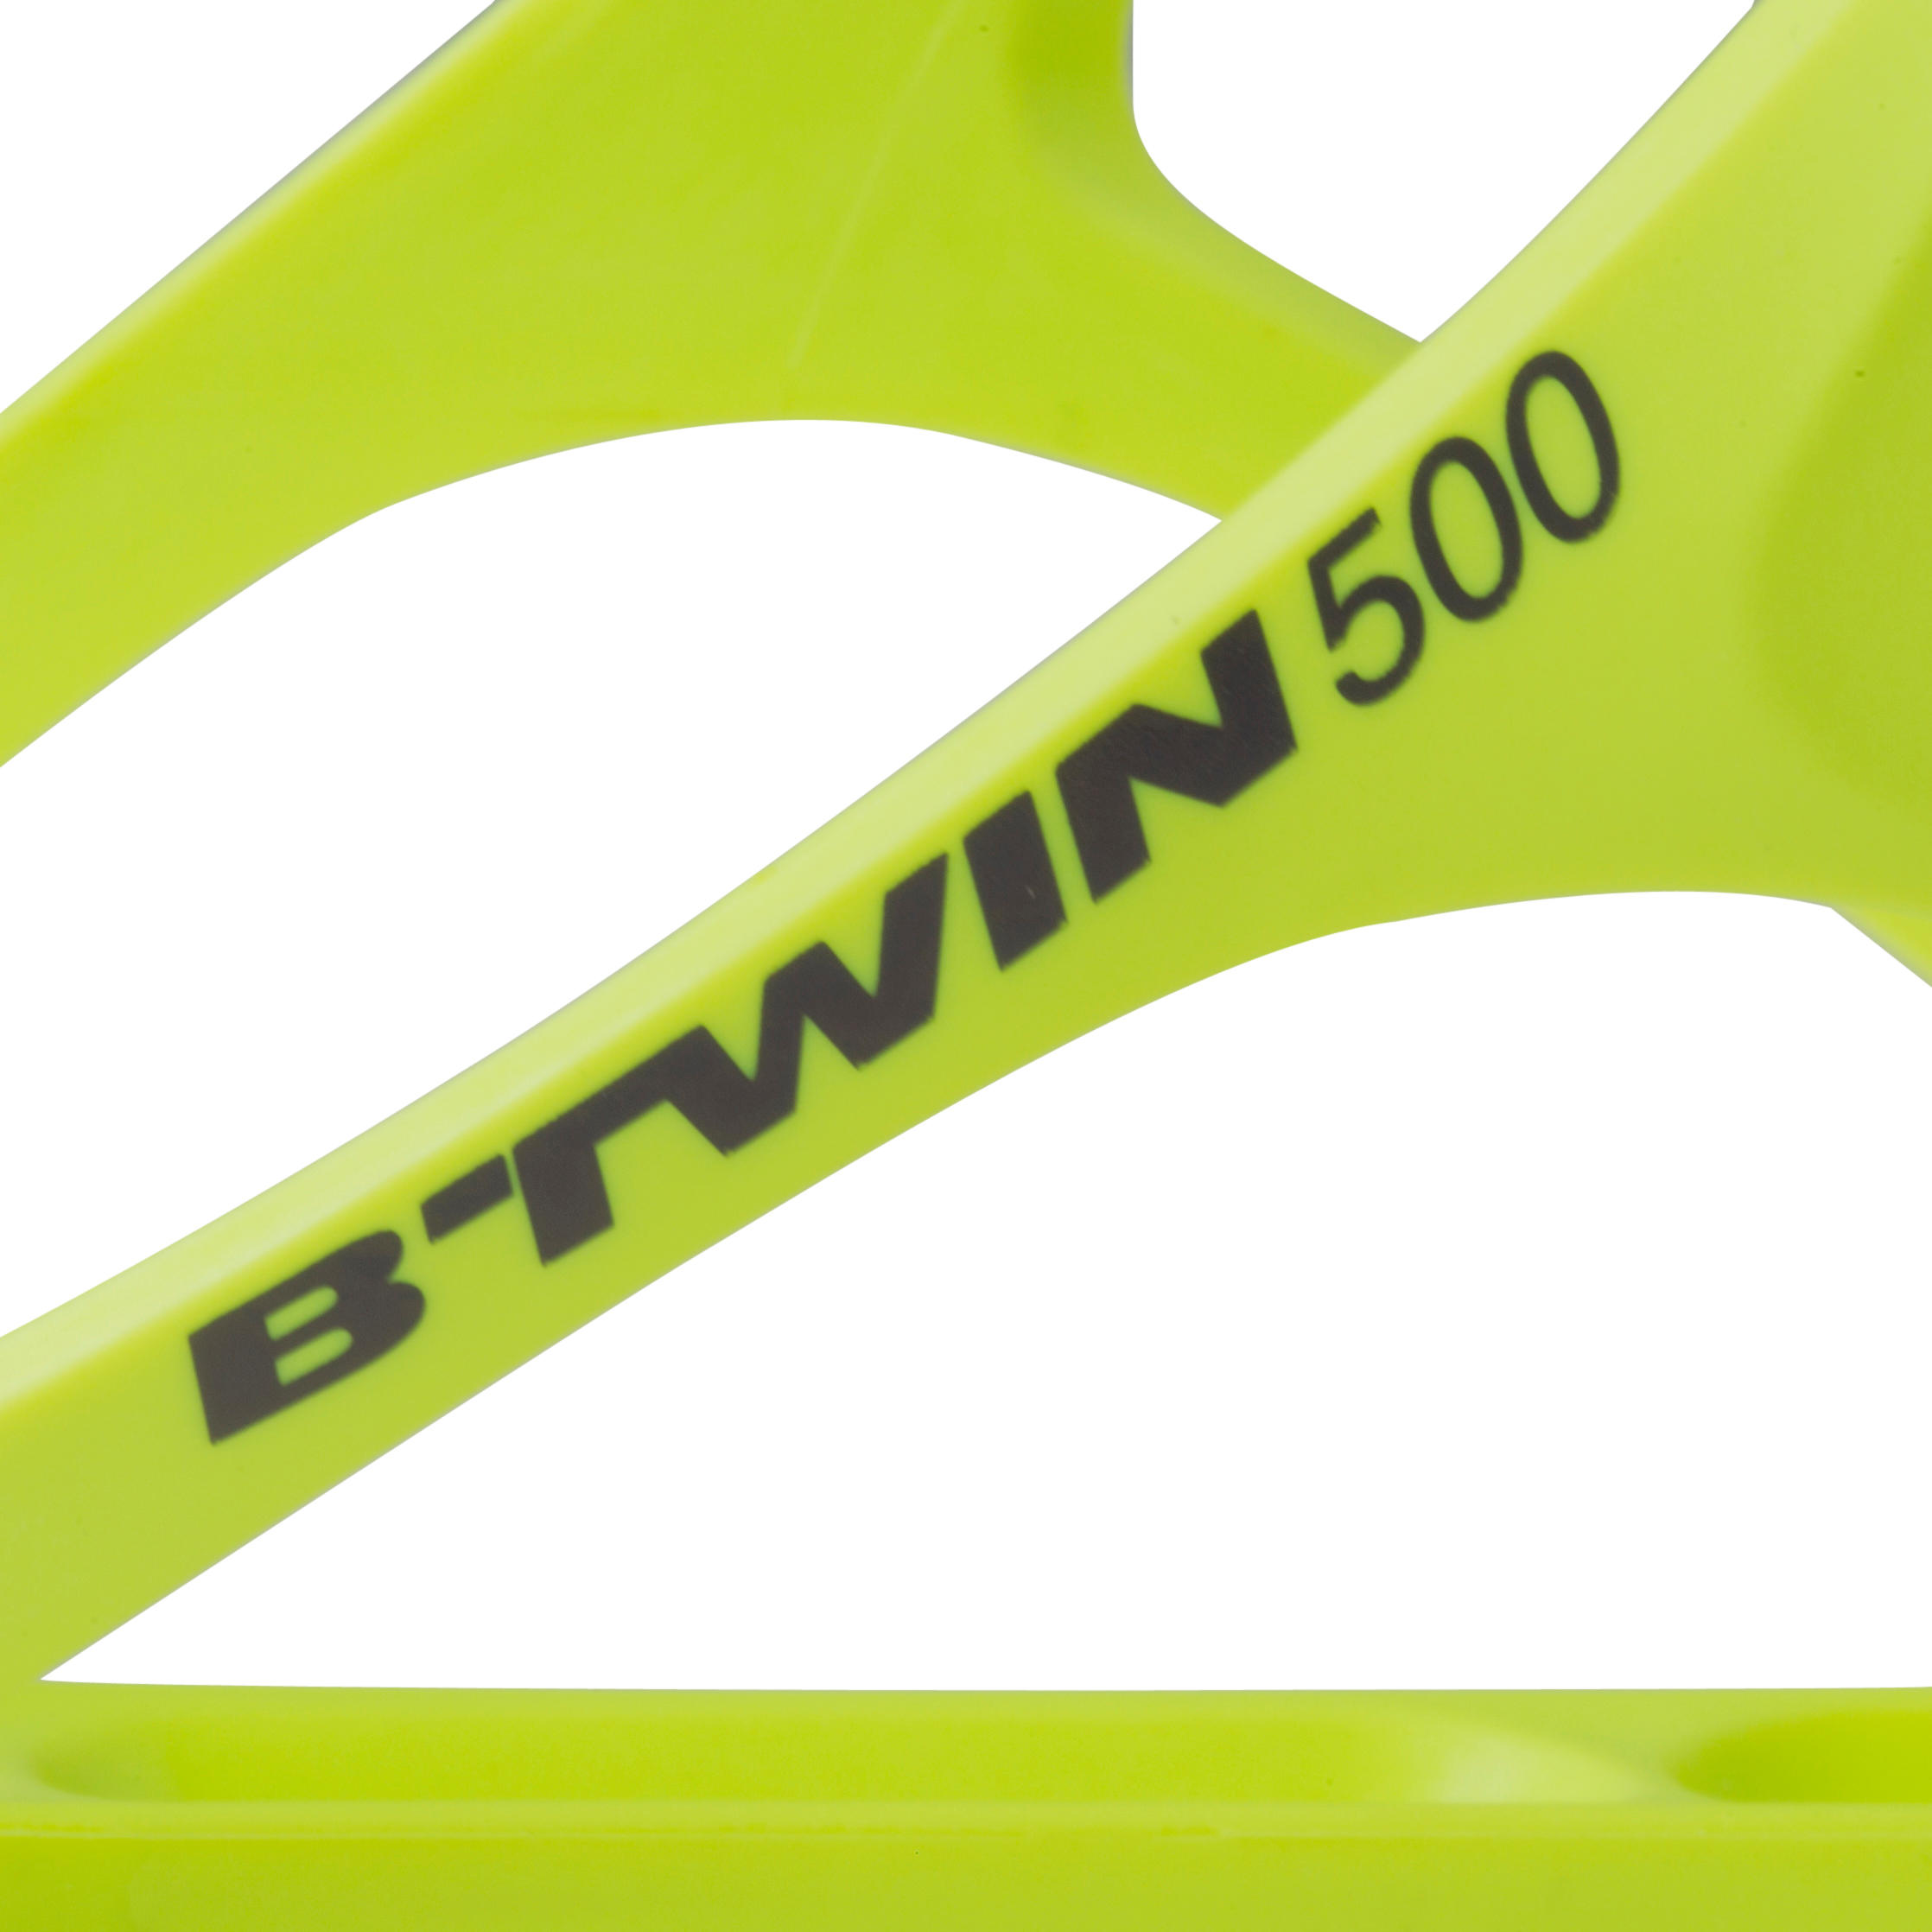 neon yellow water bottle cage